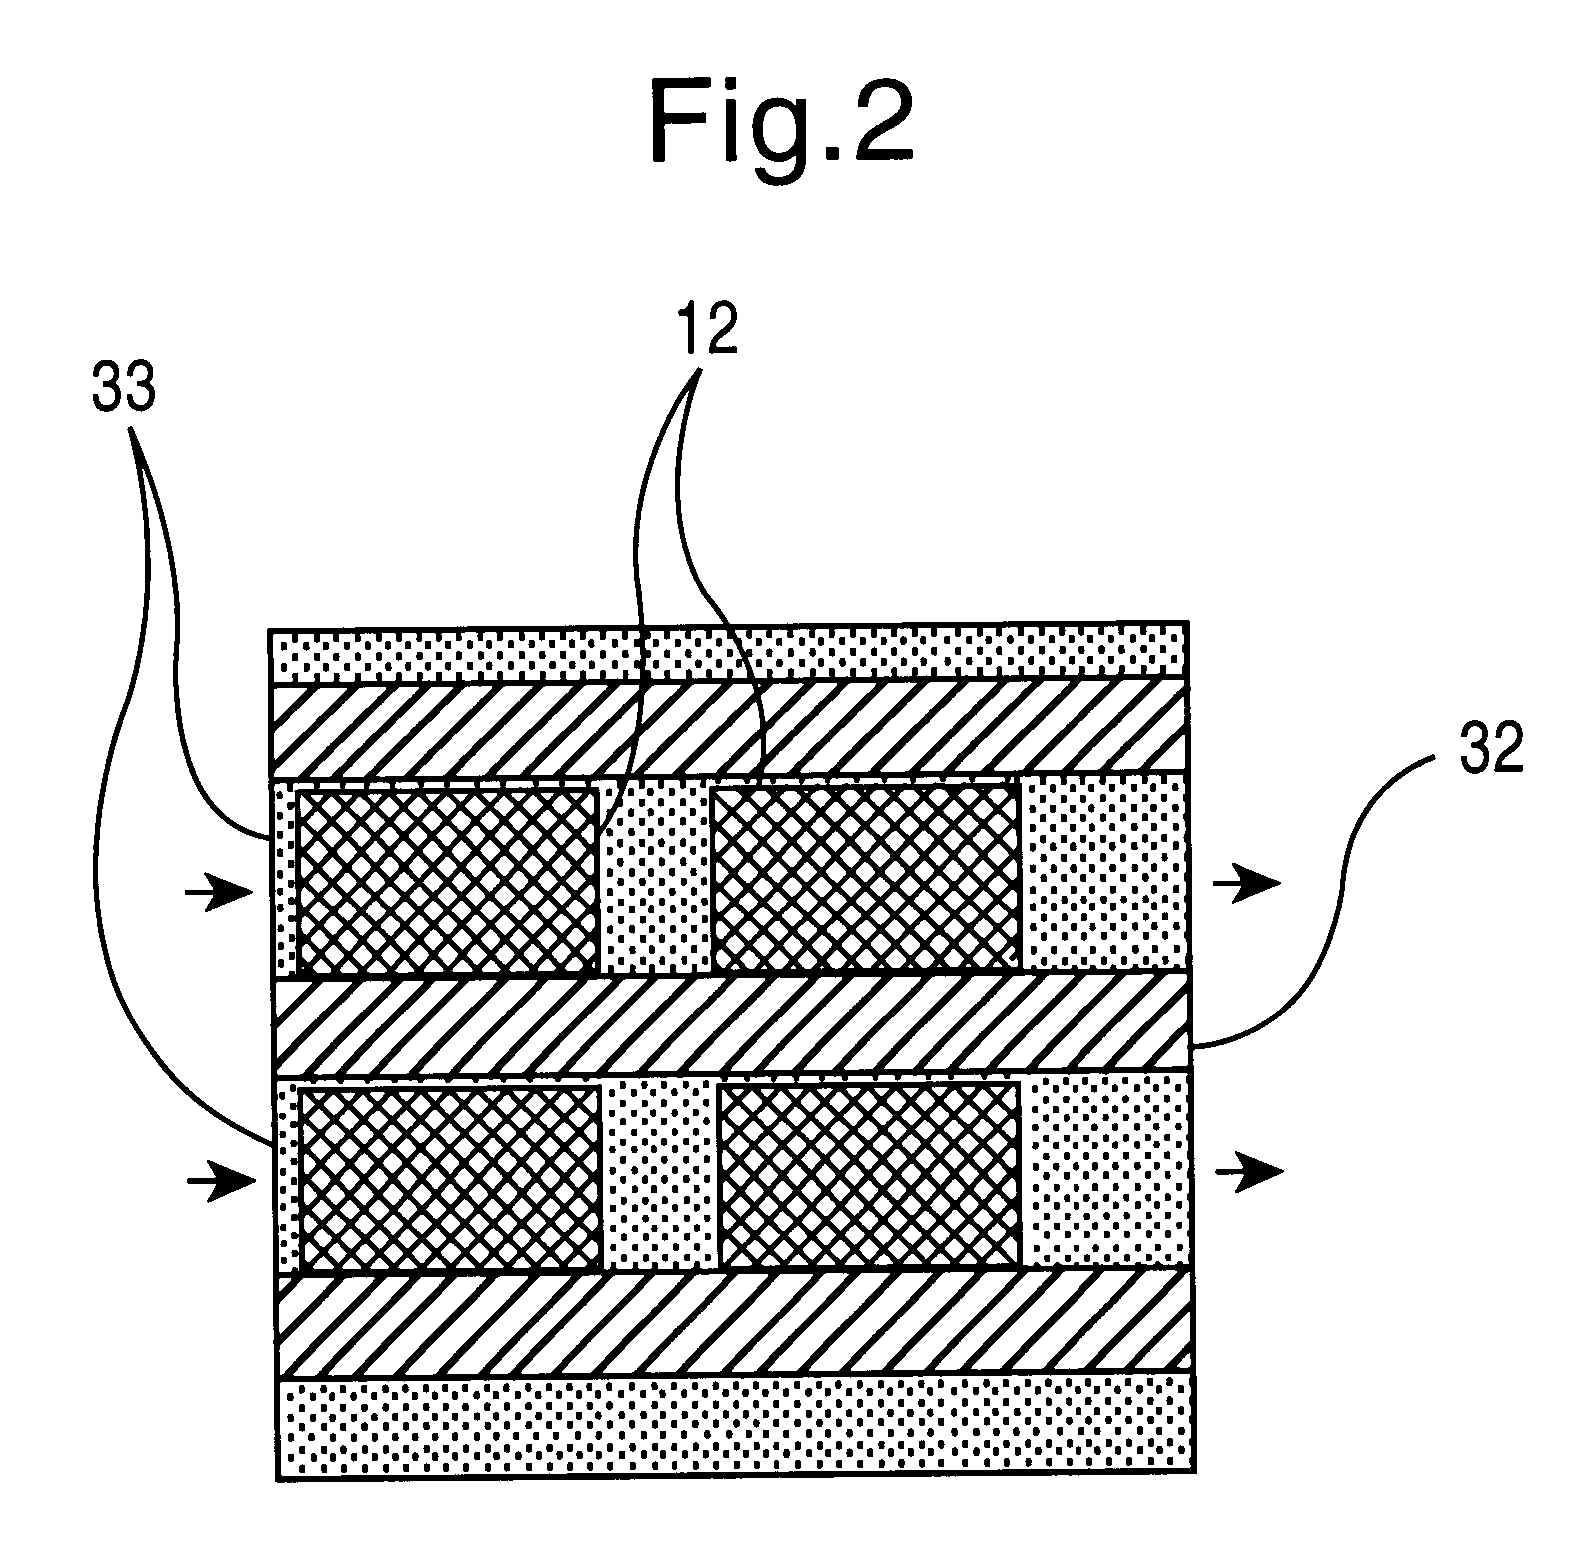 Method for producing polymers